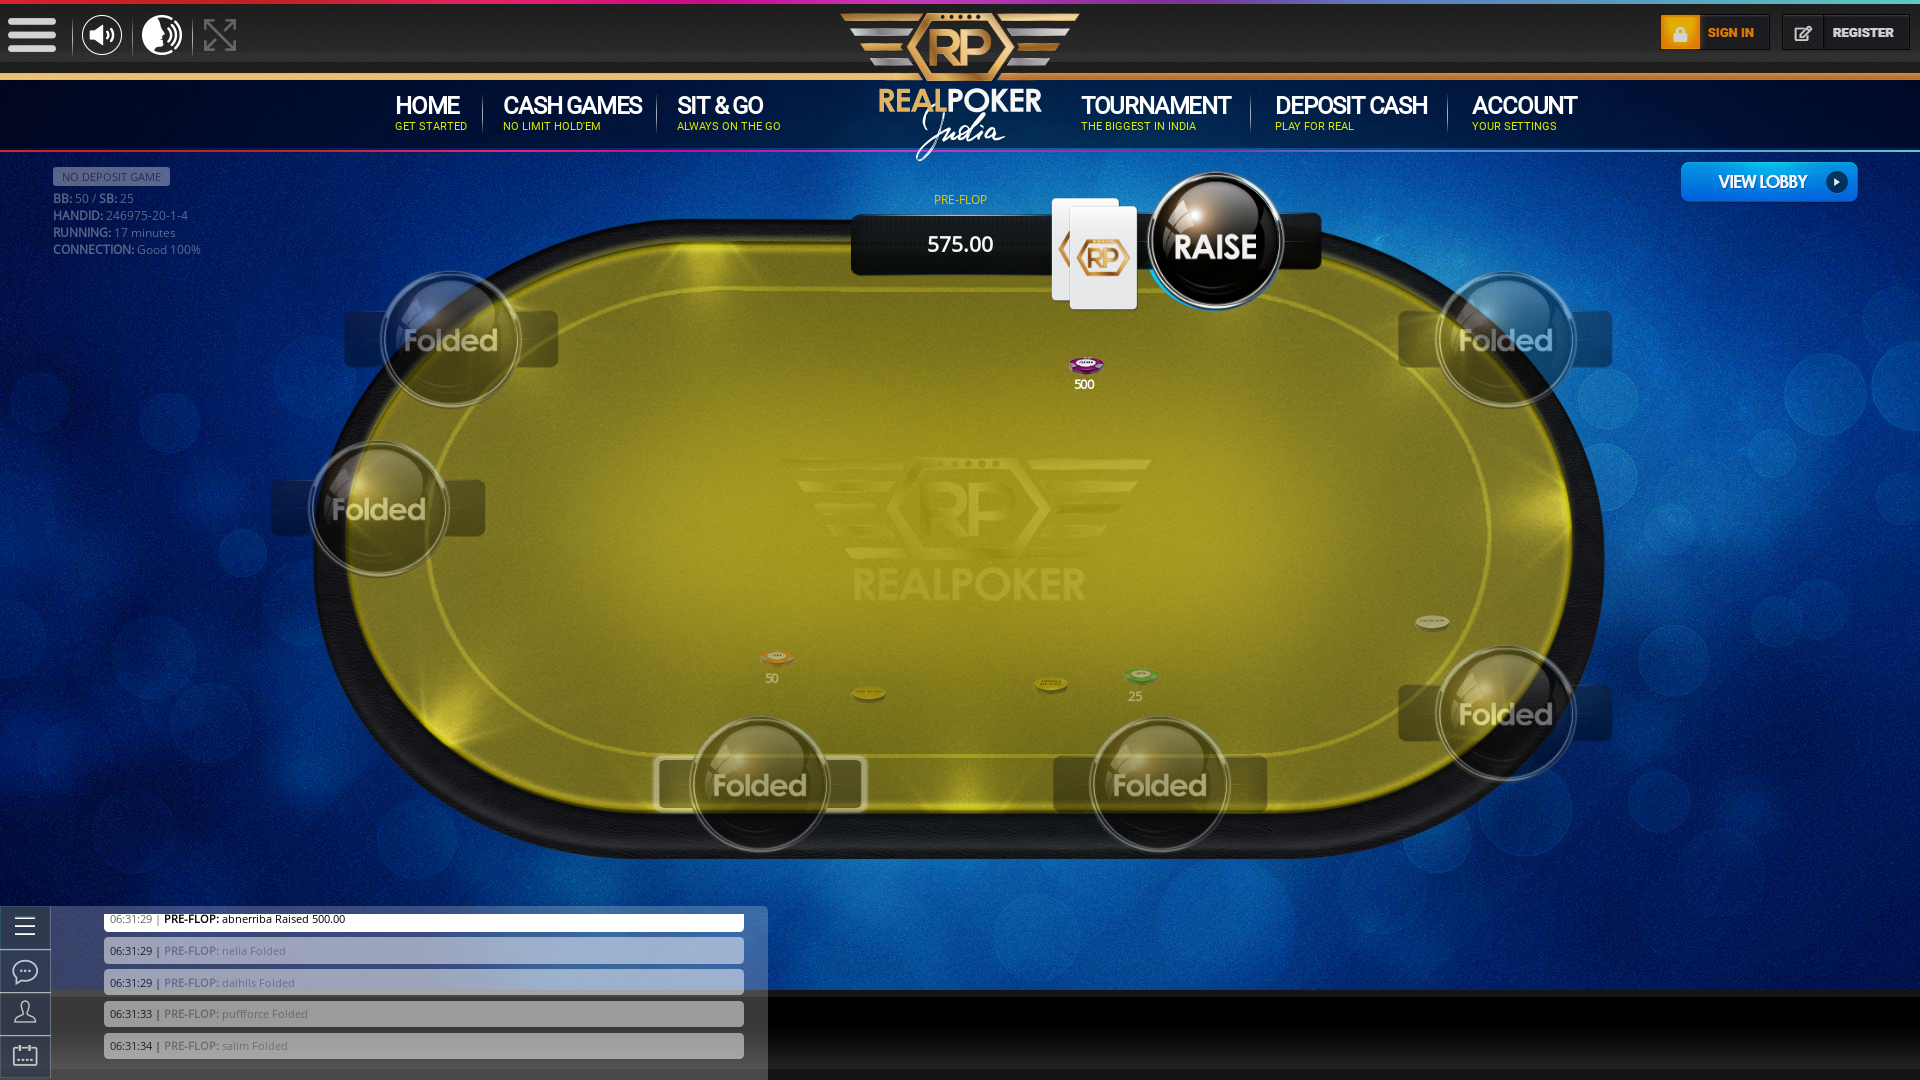 Real Indian poker on a 10 player table in the 17th minute of the game